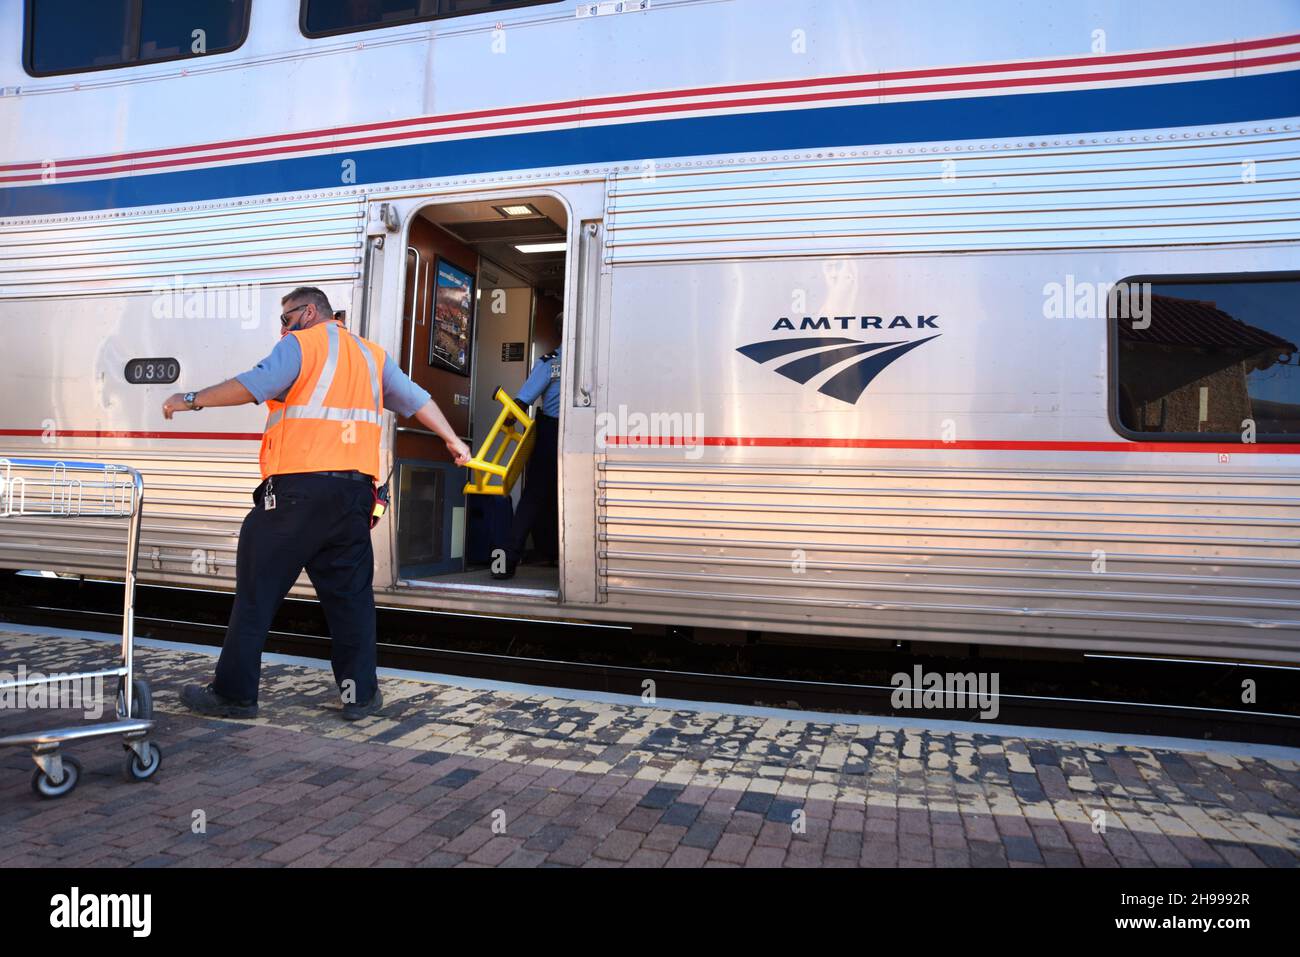 An Amtrak employee in Lamy, New Mexico, loads luggage into the Southwest Chief passenger train which runs between Chicago and Los Angeles. Stock Photo